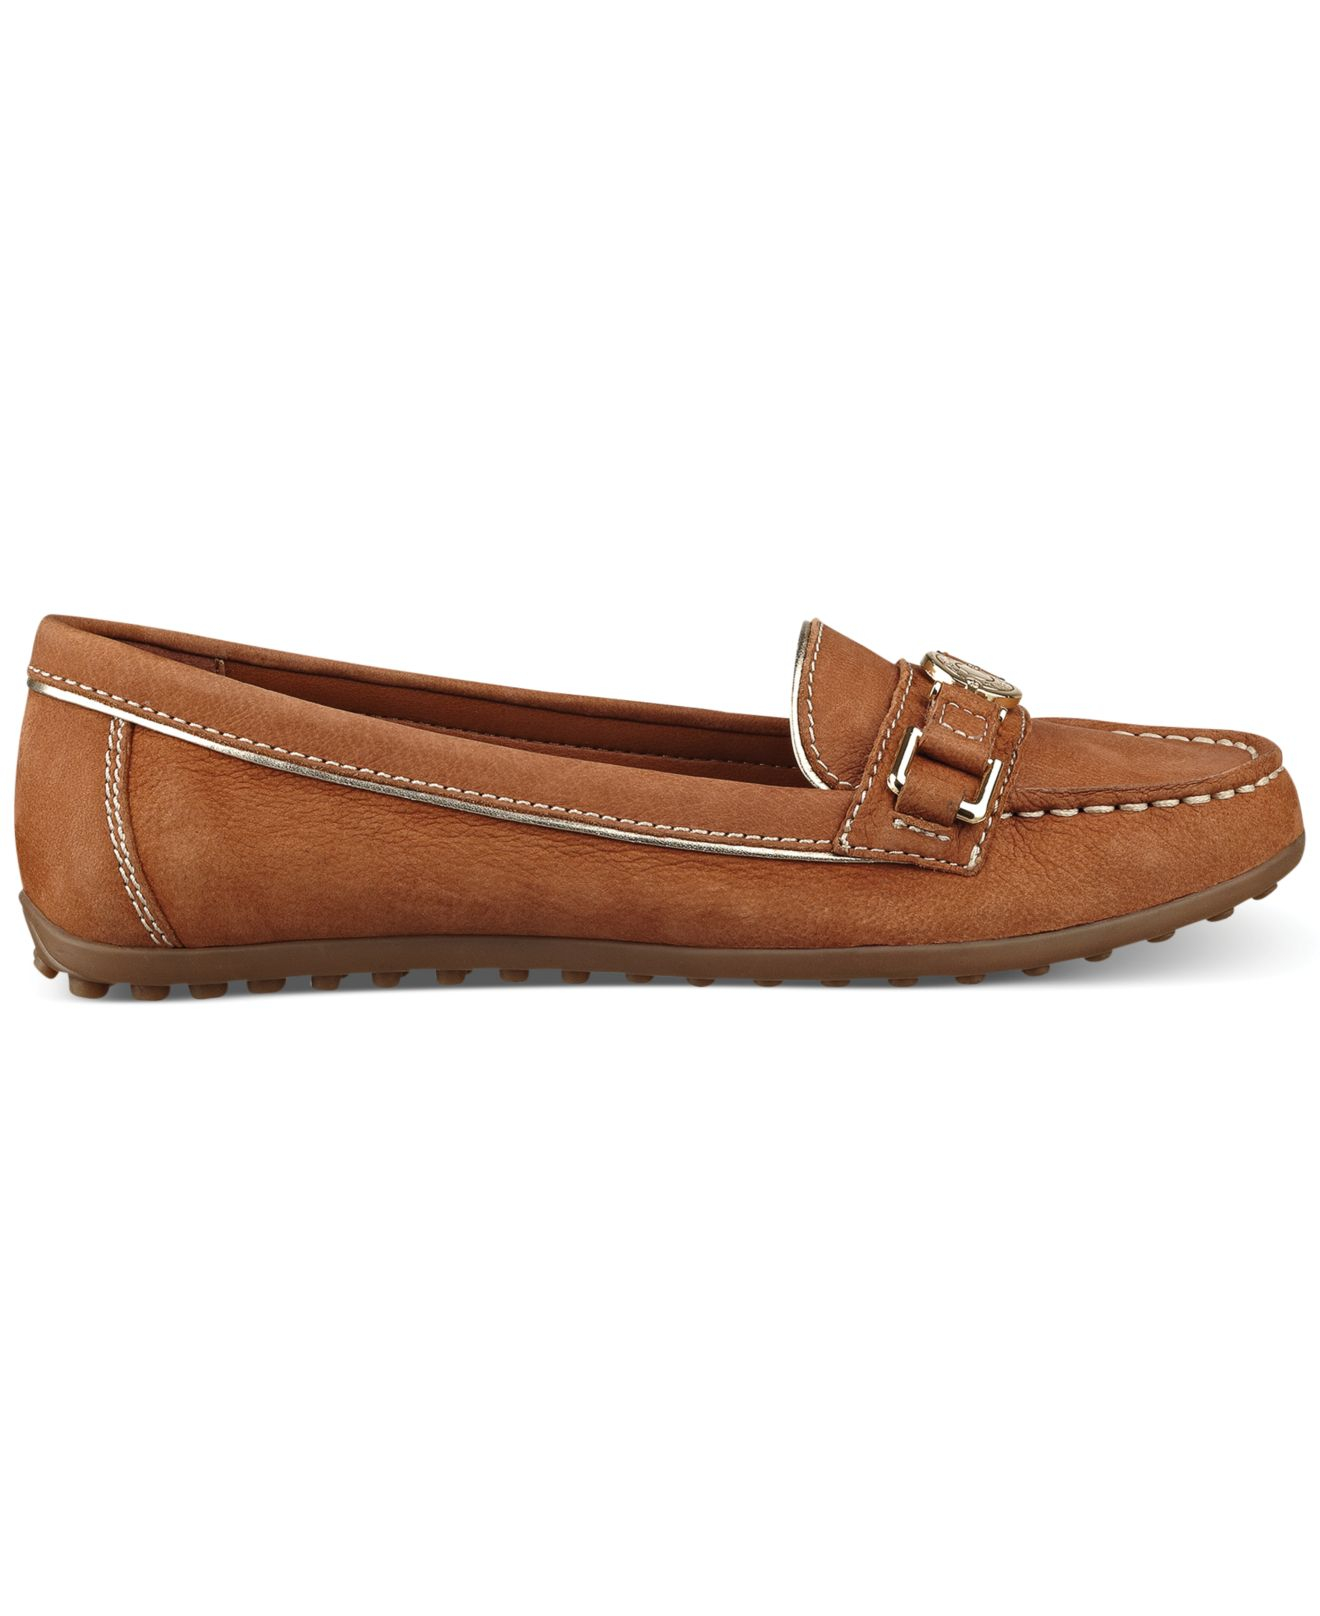 tommy hilfiger loafers ladies